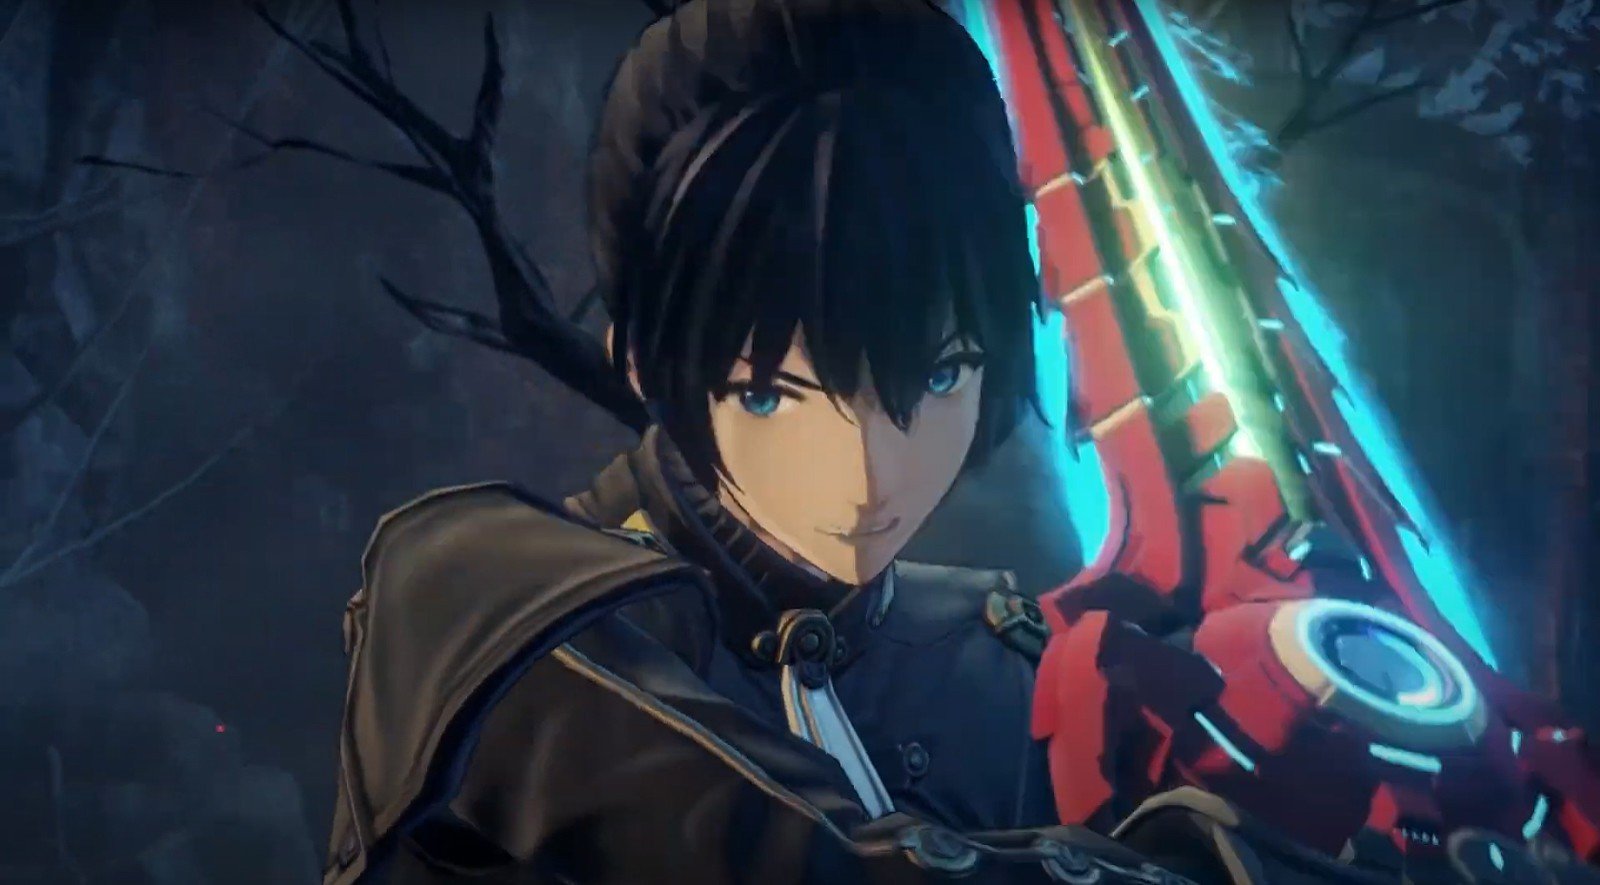 A character with a sword in Xenoblade Chronicles 3